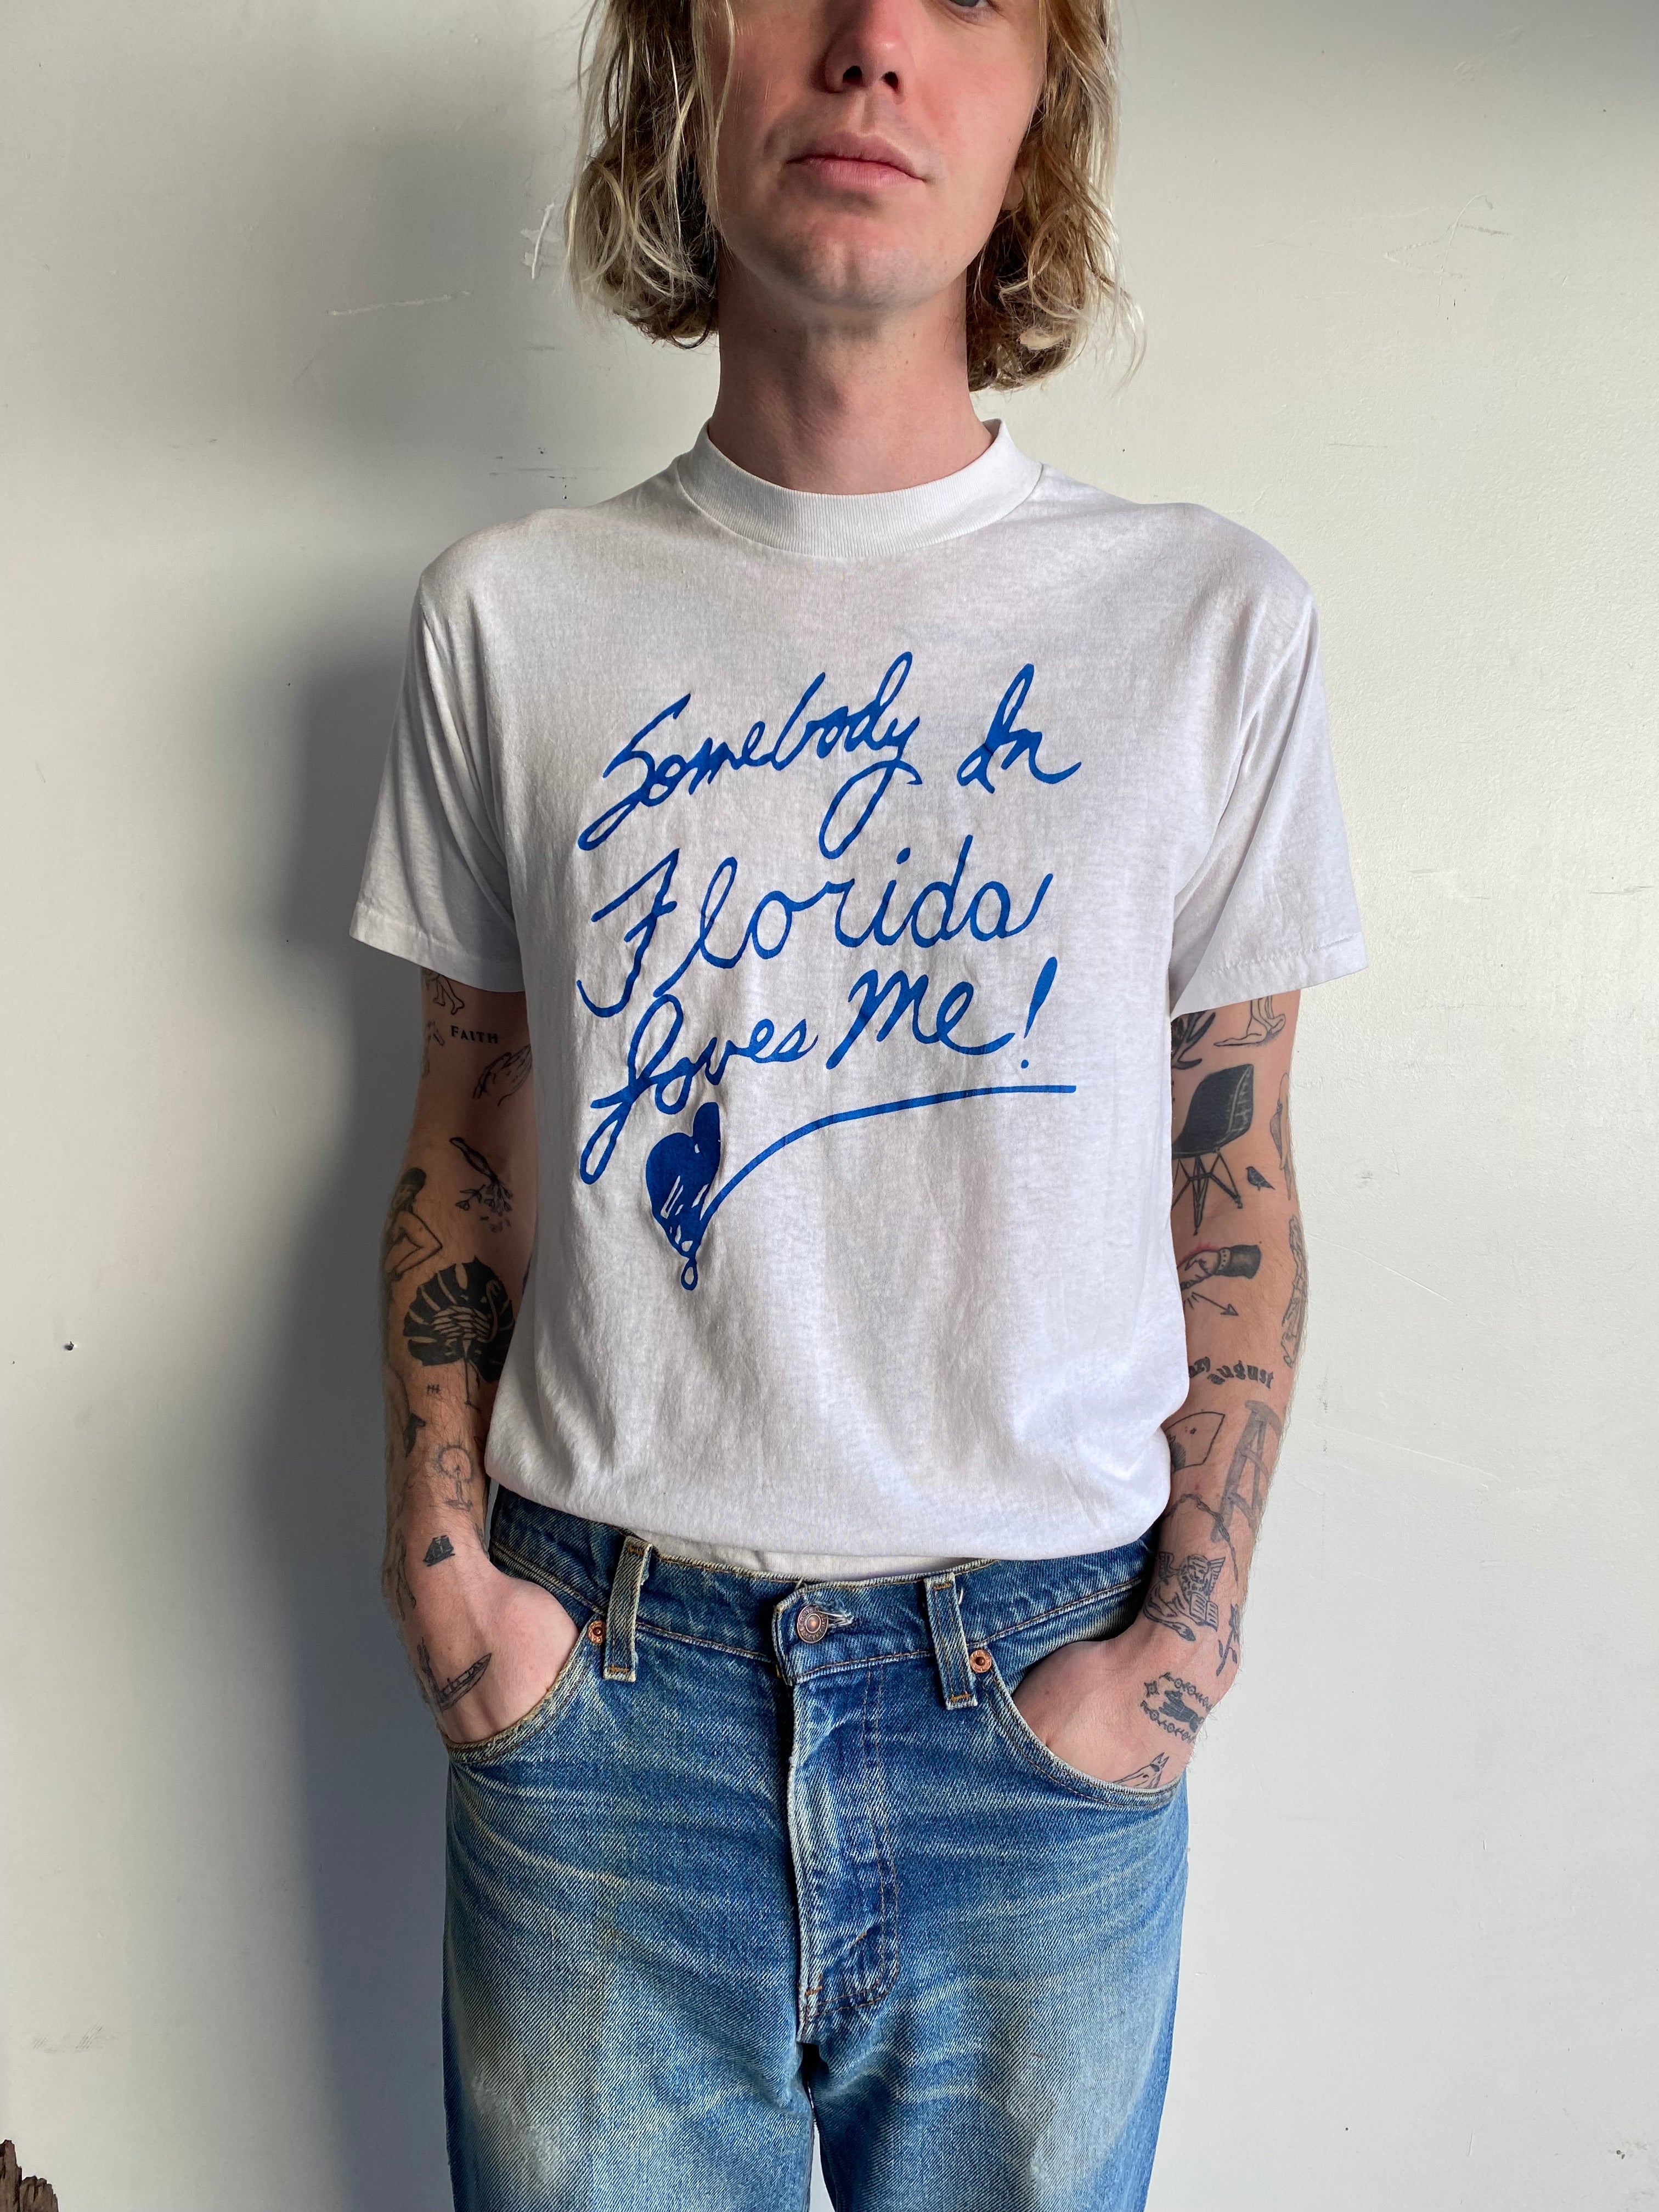 1980s "Somebody in Florida Loves Me!" Tee (S/M)